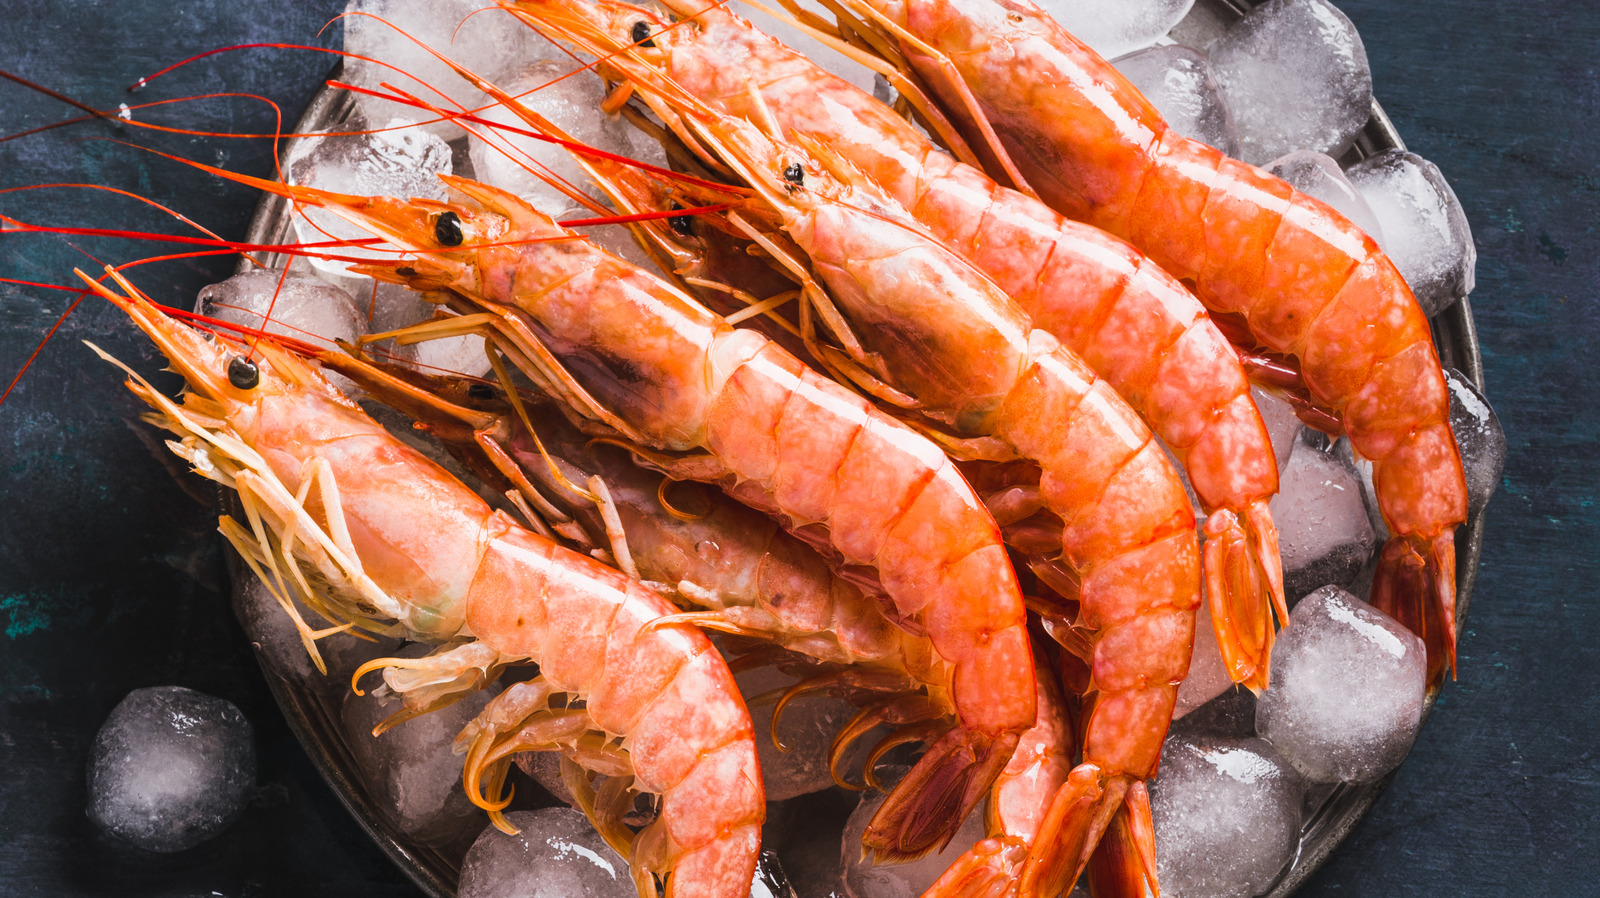 What's The Difference Between Shrimp And Prawns?